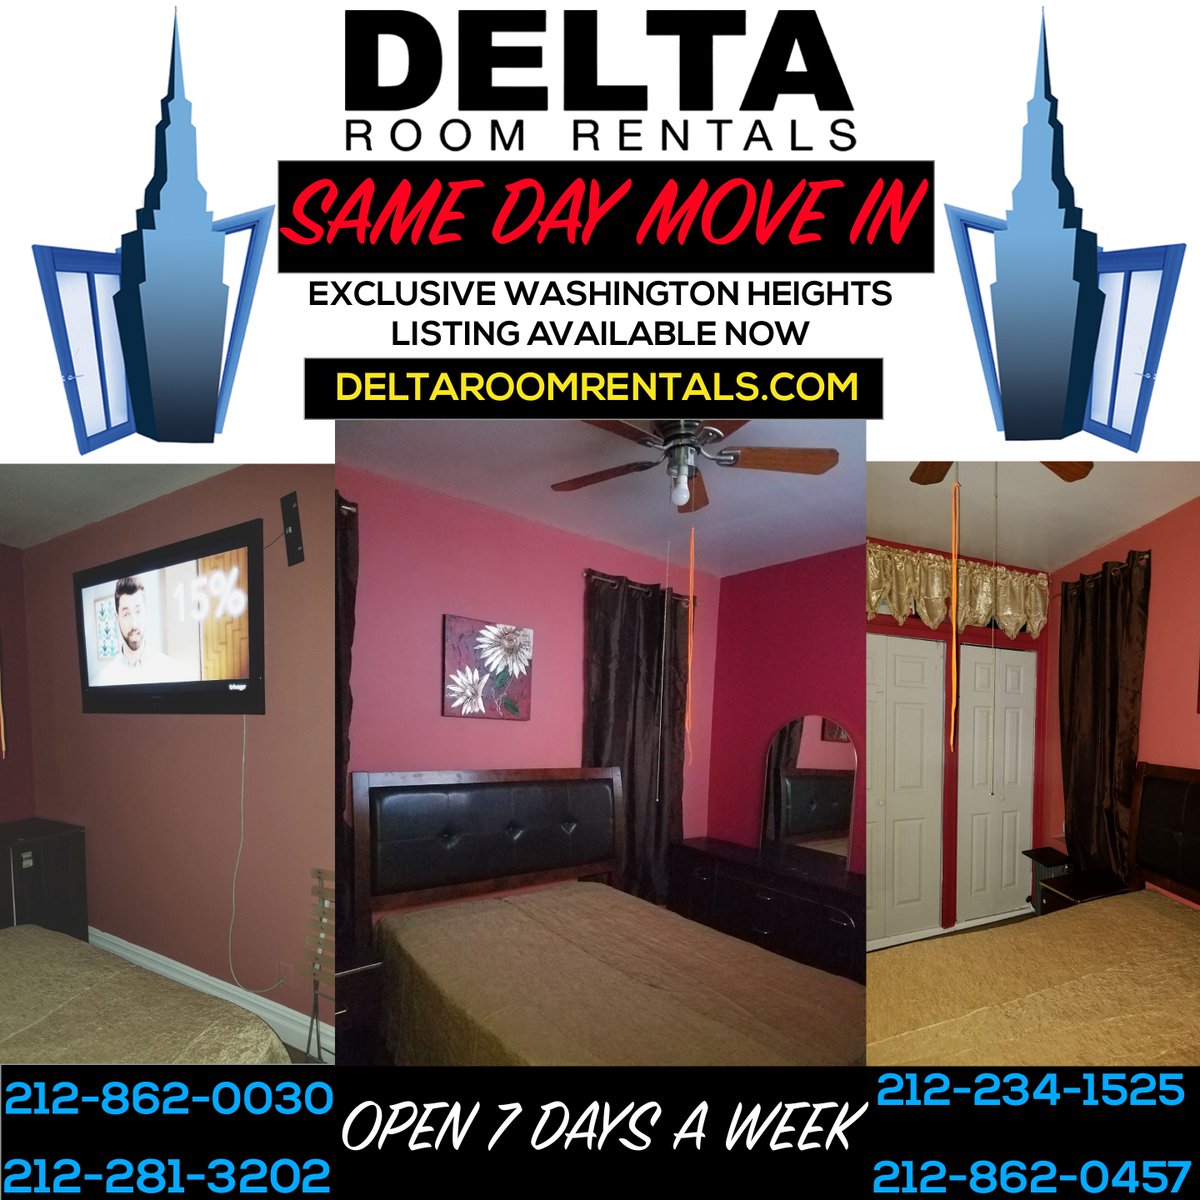 Delta Room Rentals On Twitter Same Day Move In Fully